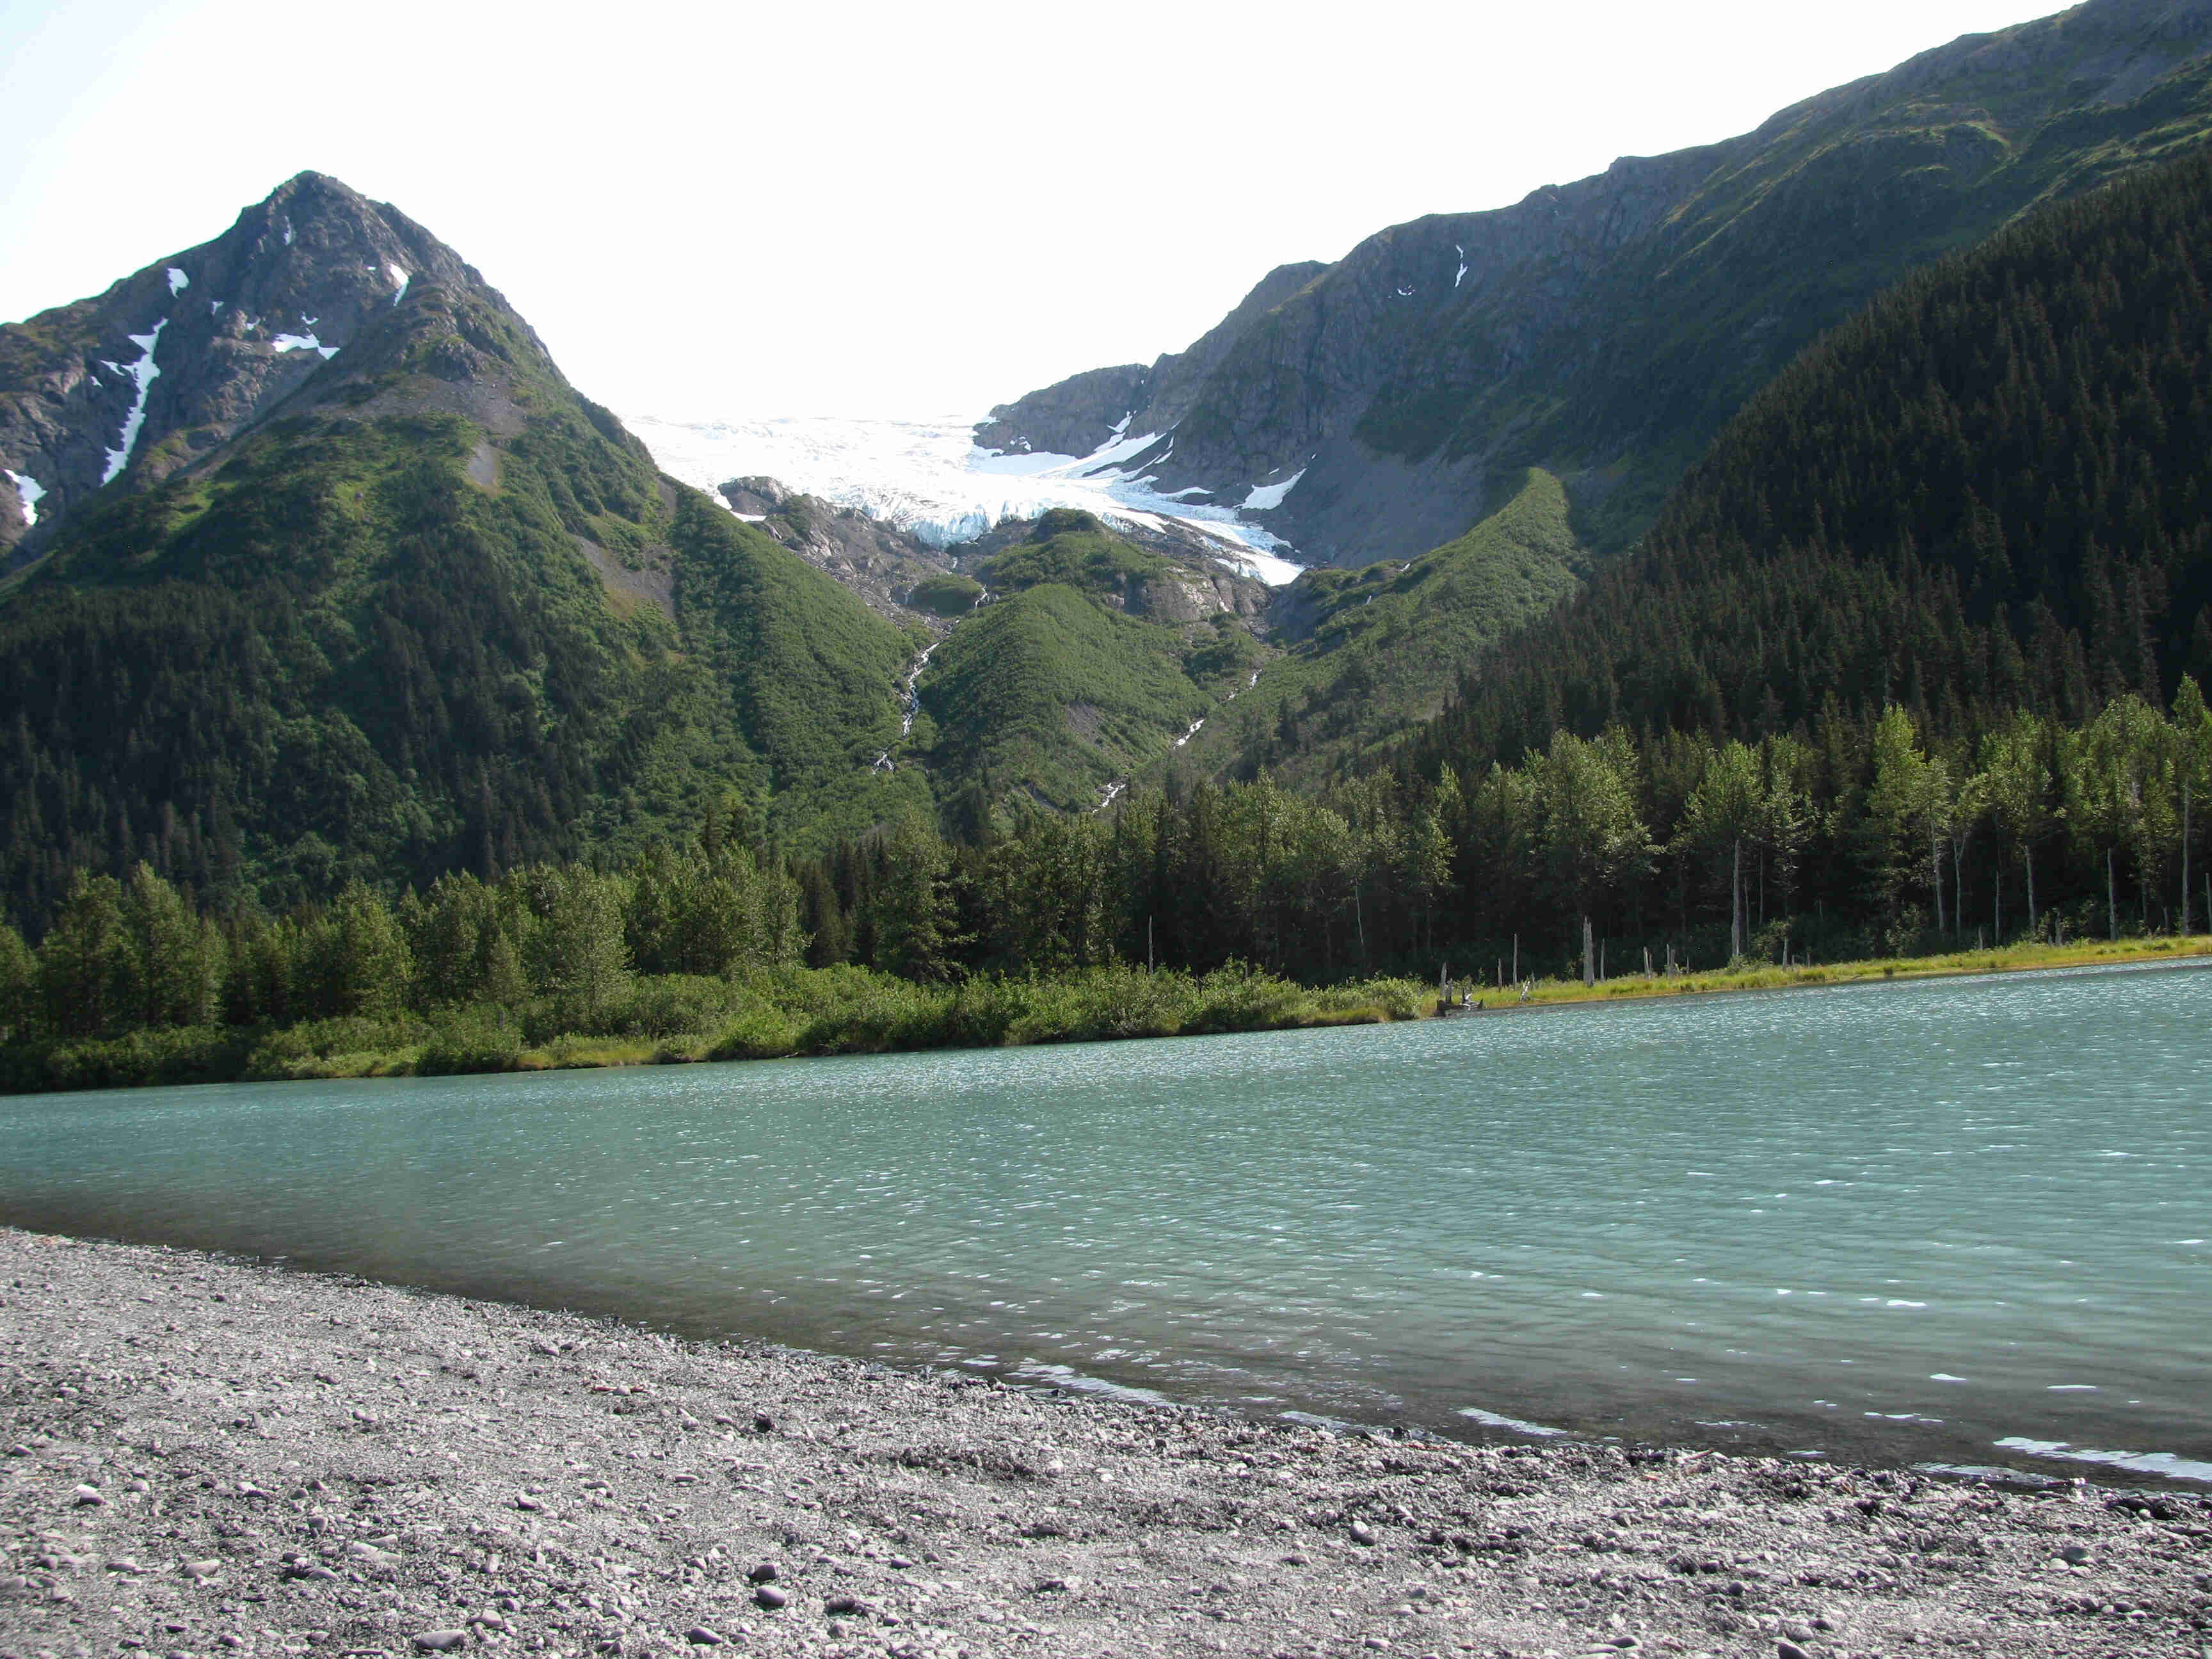 A turquoise colored lake, at the base of mountains with a glacier in a valley between them